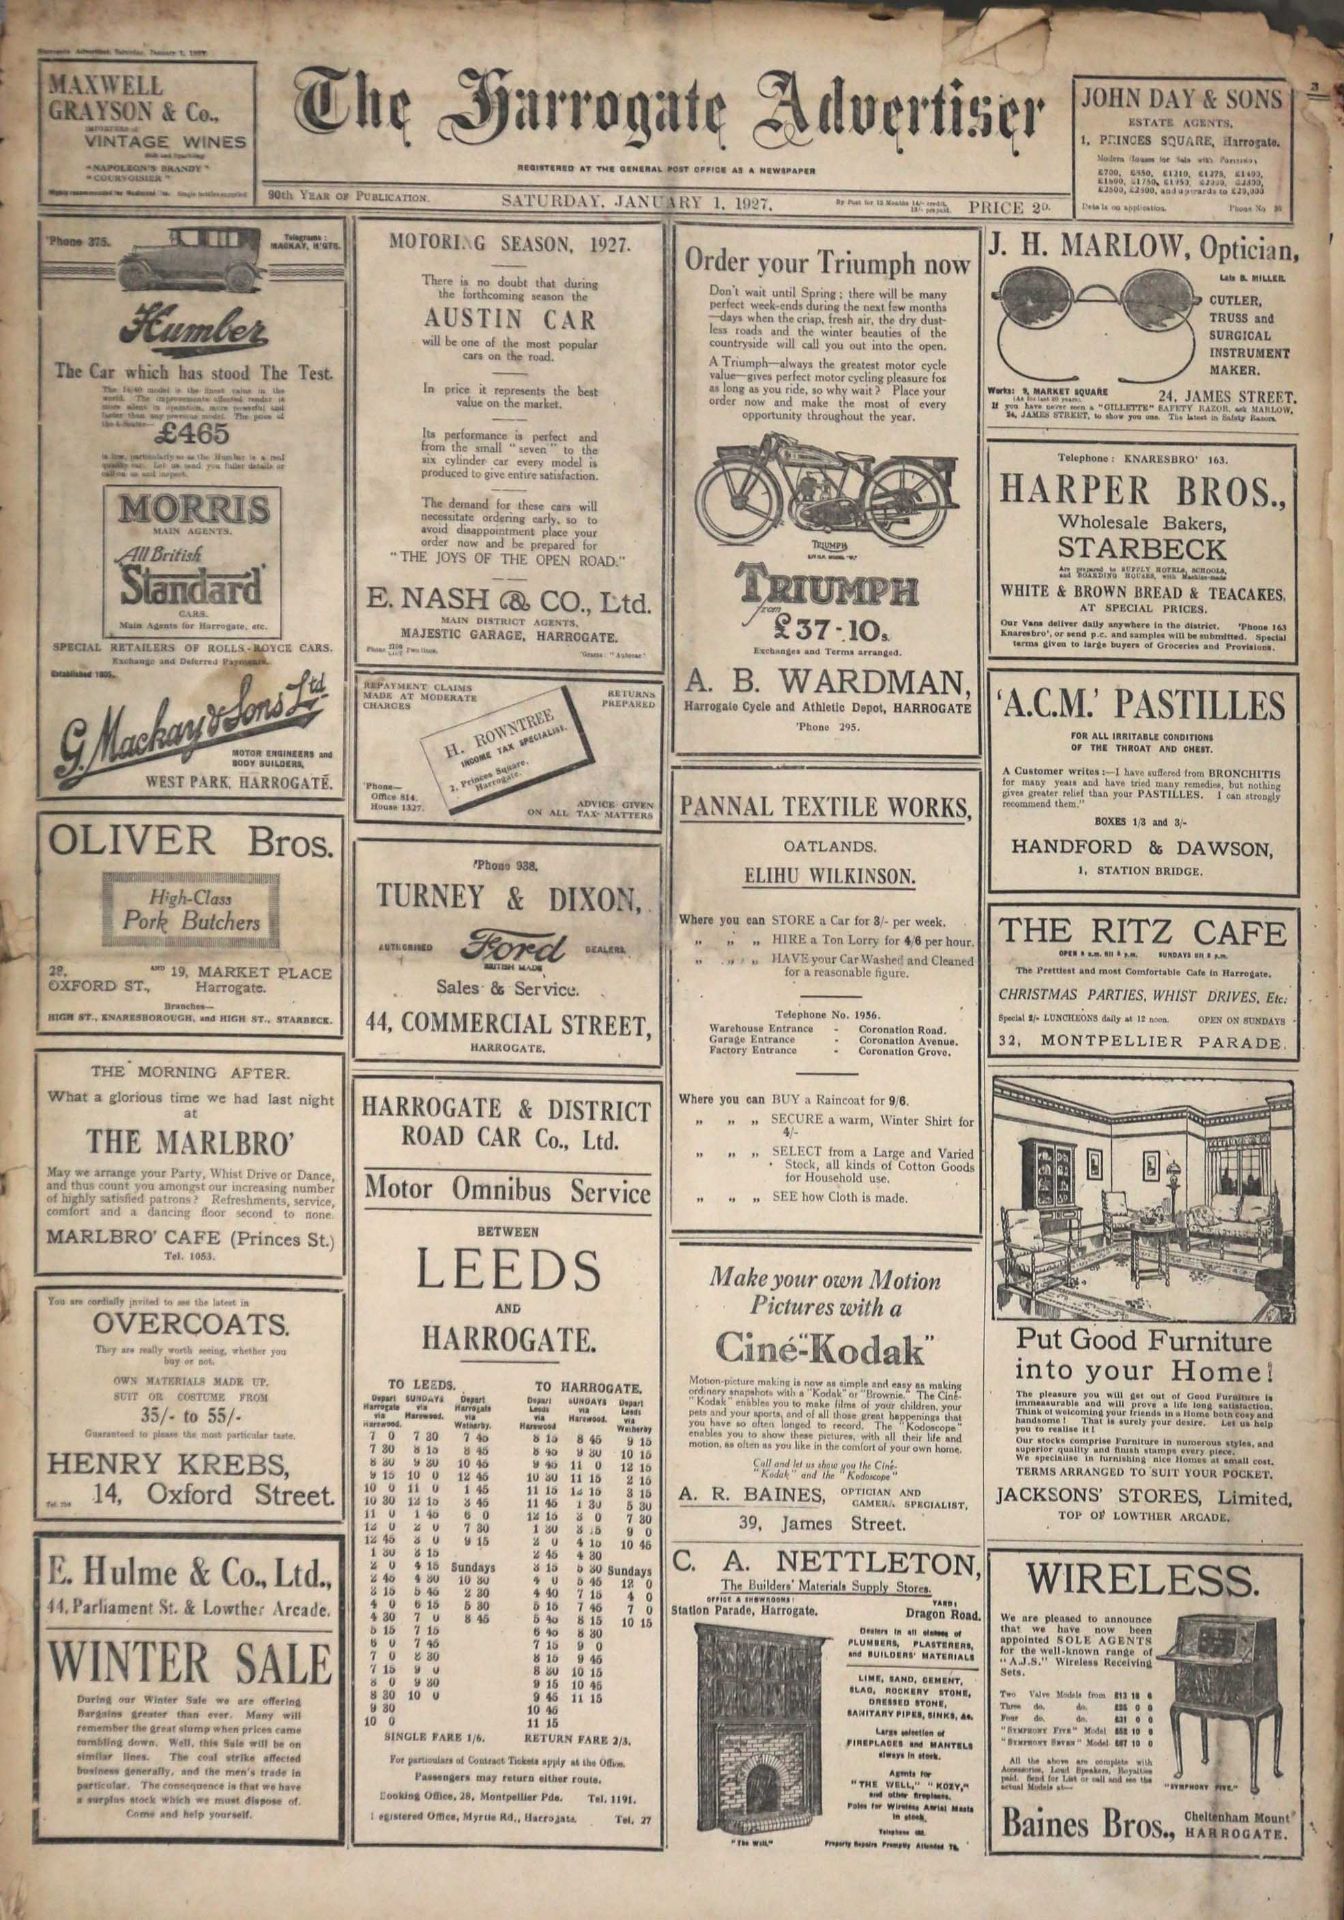 The Harrogate Herald and Weekly List of Visitors No 45 vol LXIII - Wed Jan 5th 1927 to Dec 28th - - Image 2 of 12